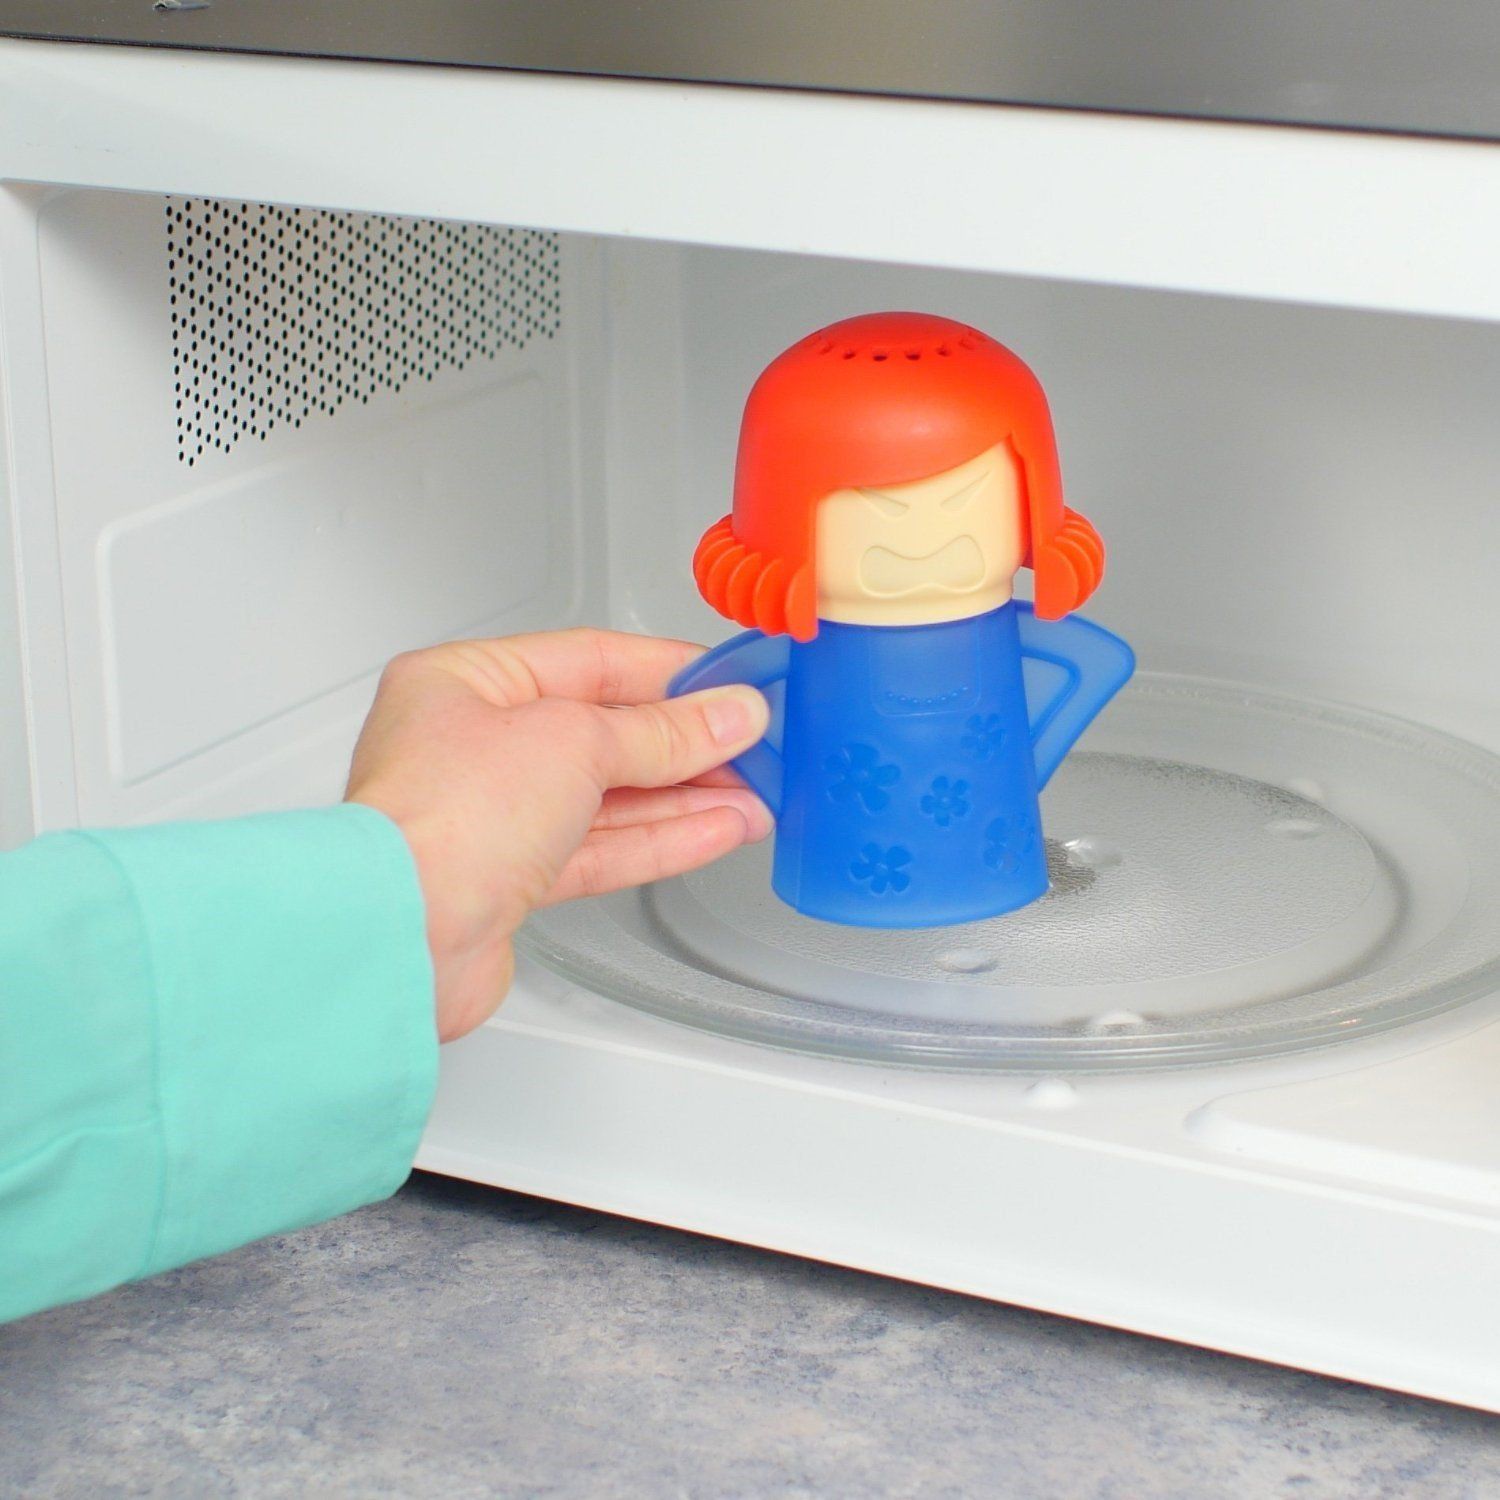 The Angry Mama Microwave Cleaner Is Worth the Hype